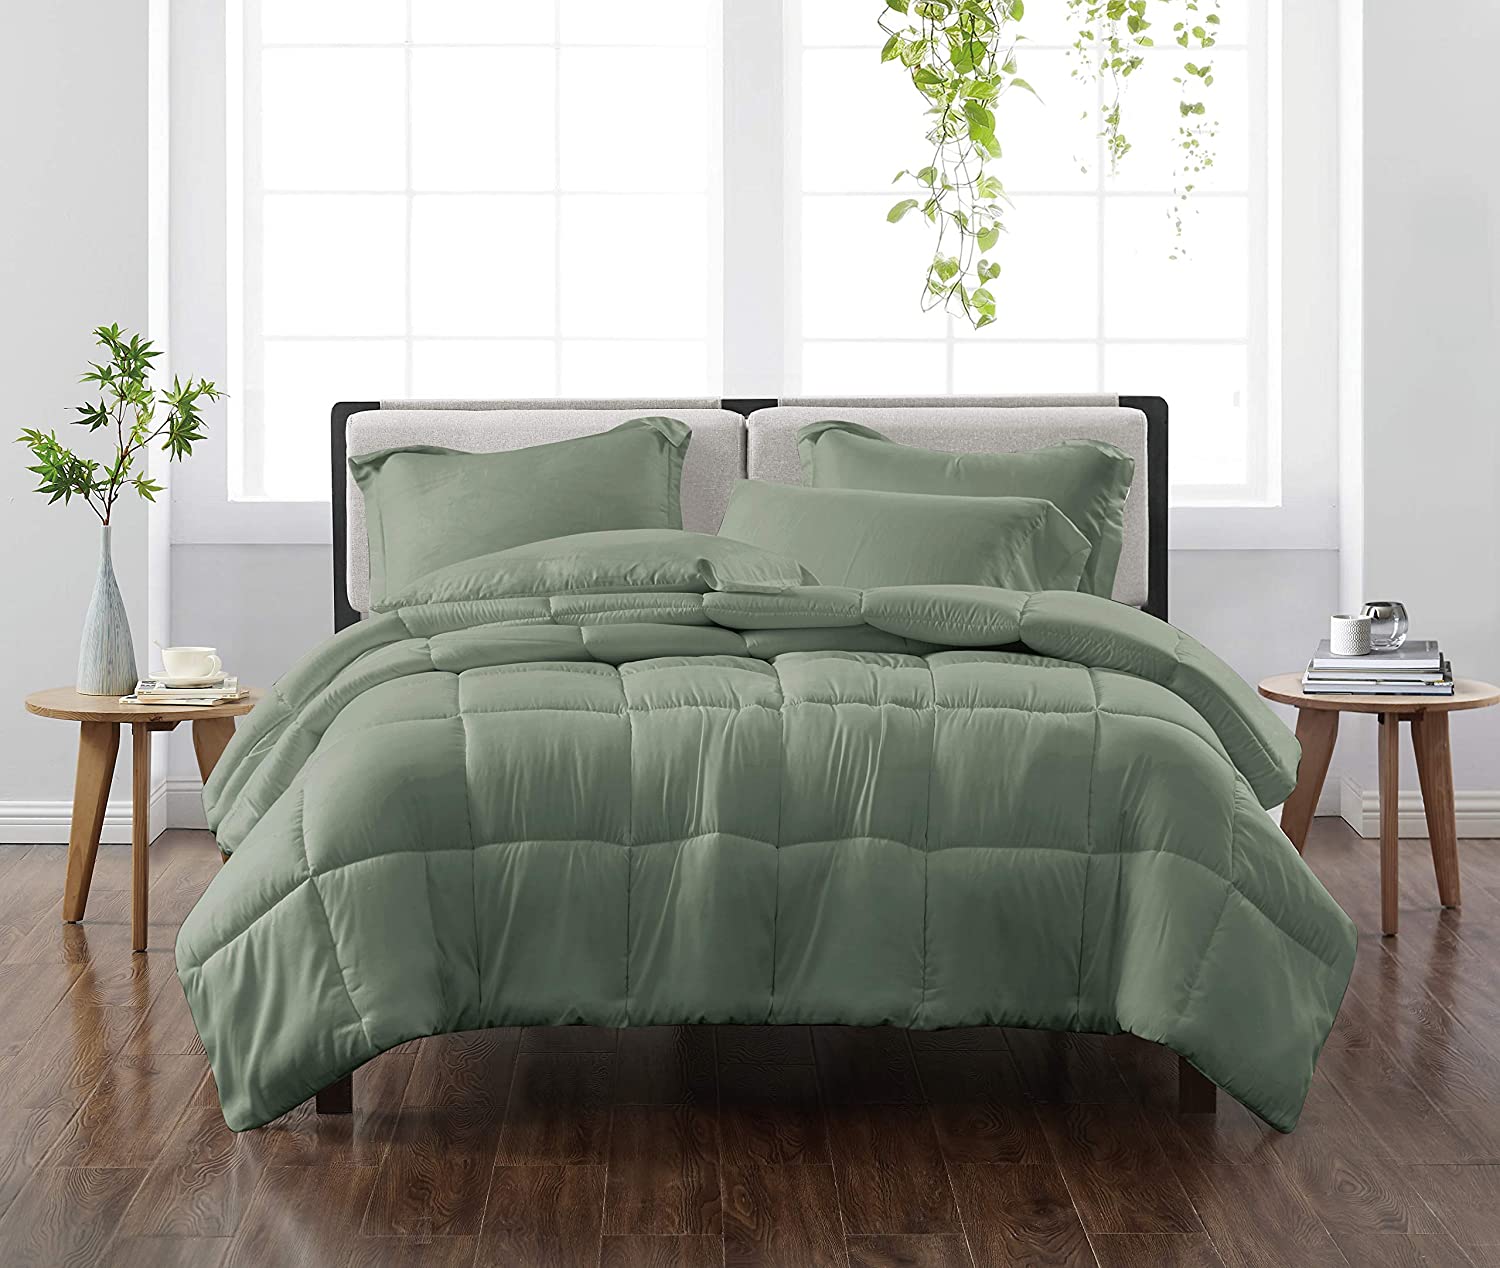 B08Q3GB622 Cannon Solid Comforter Set, Twin, Green